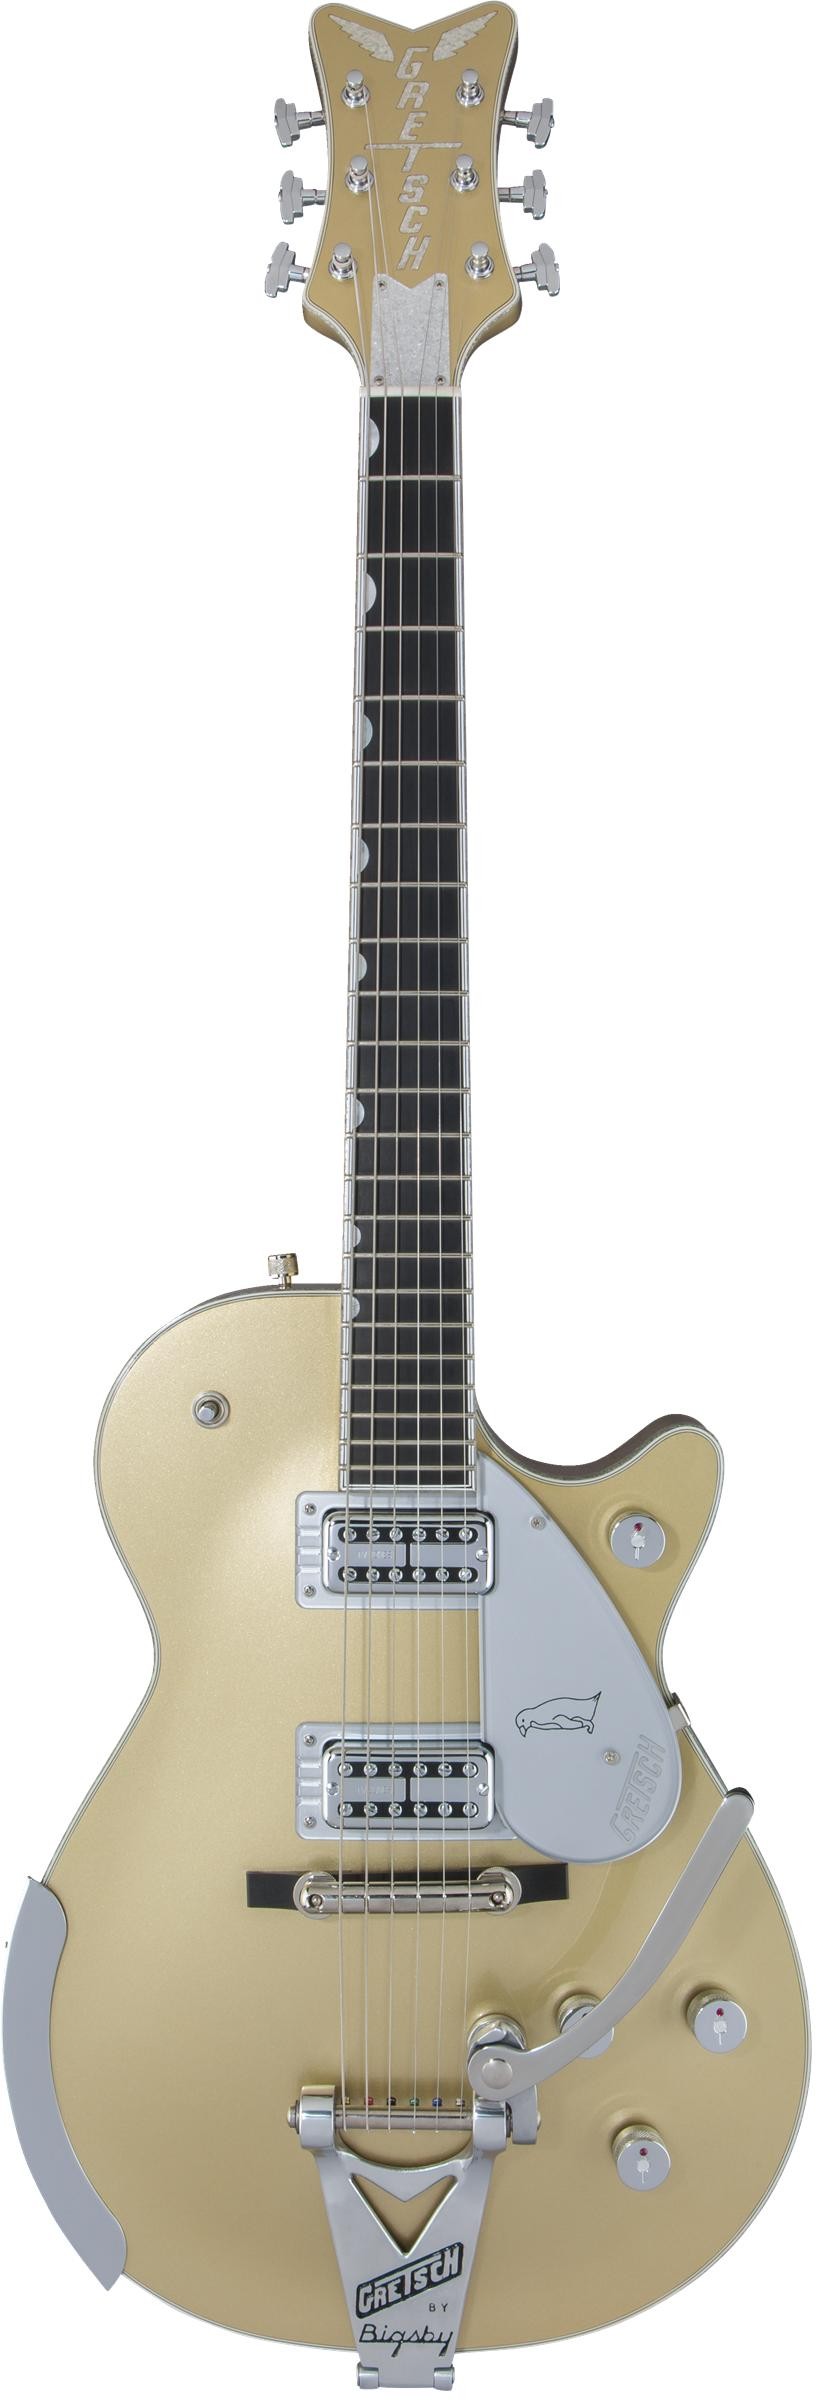 Gretsch G6134T Penguin Casino Gold Limited Edition